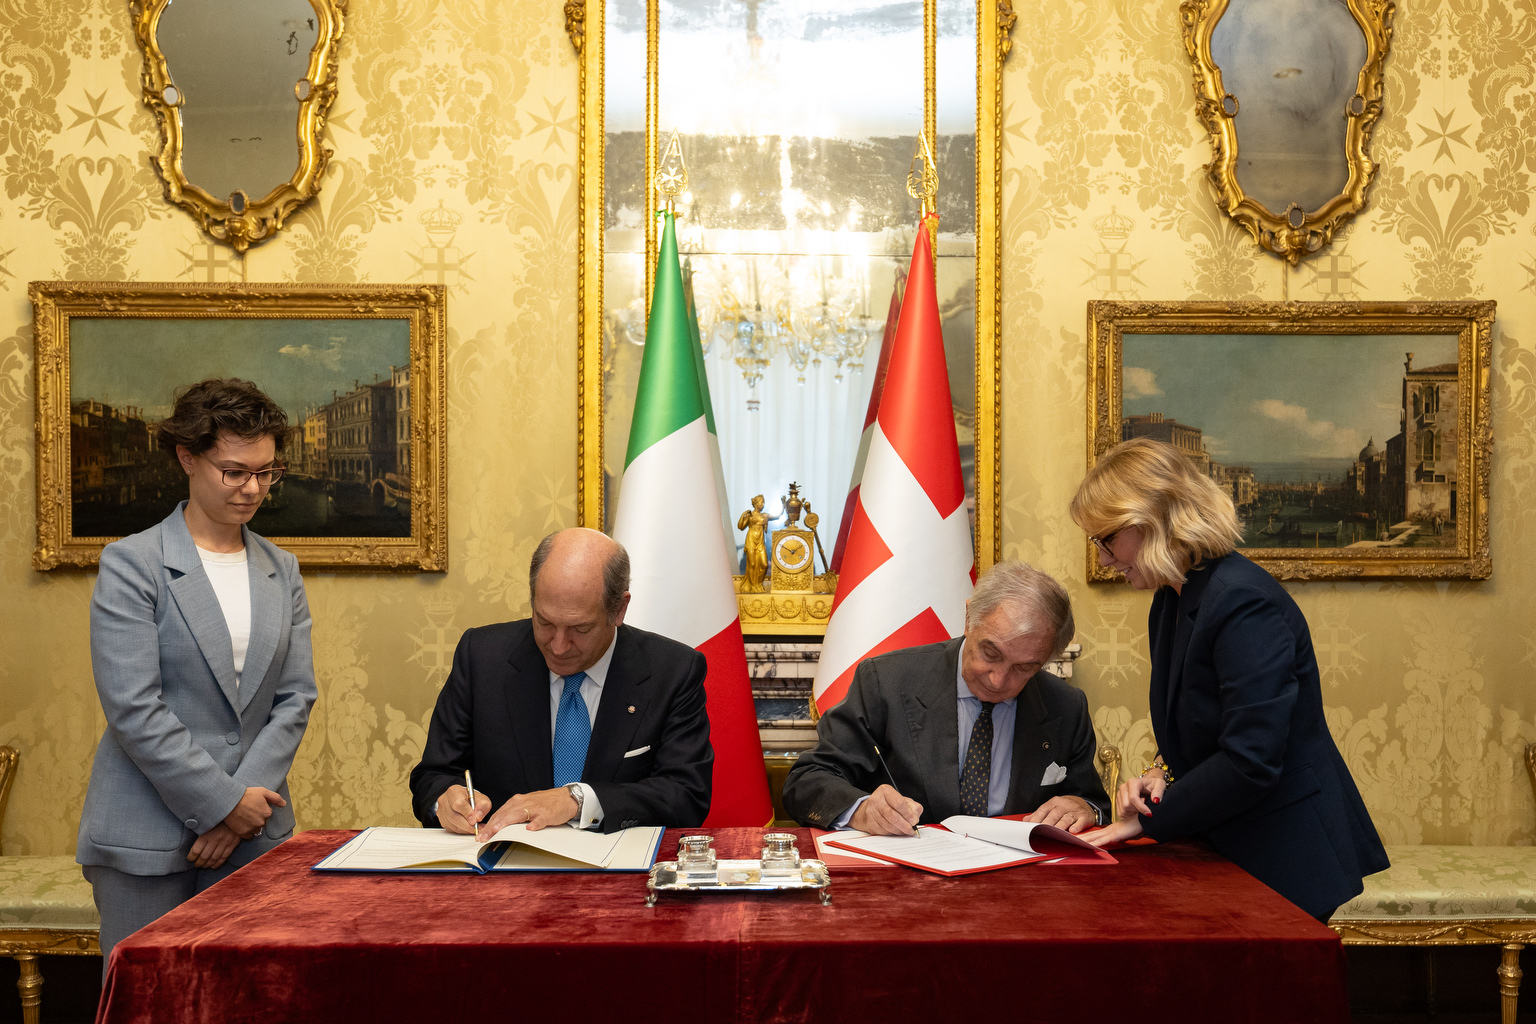 Signature of agreement with Italian Republic for Order of Malta’s Italian Relief Corps